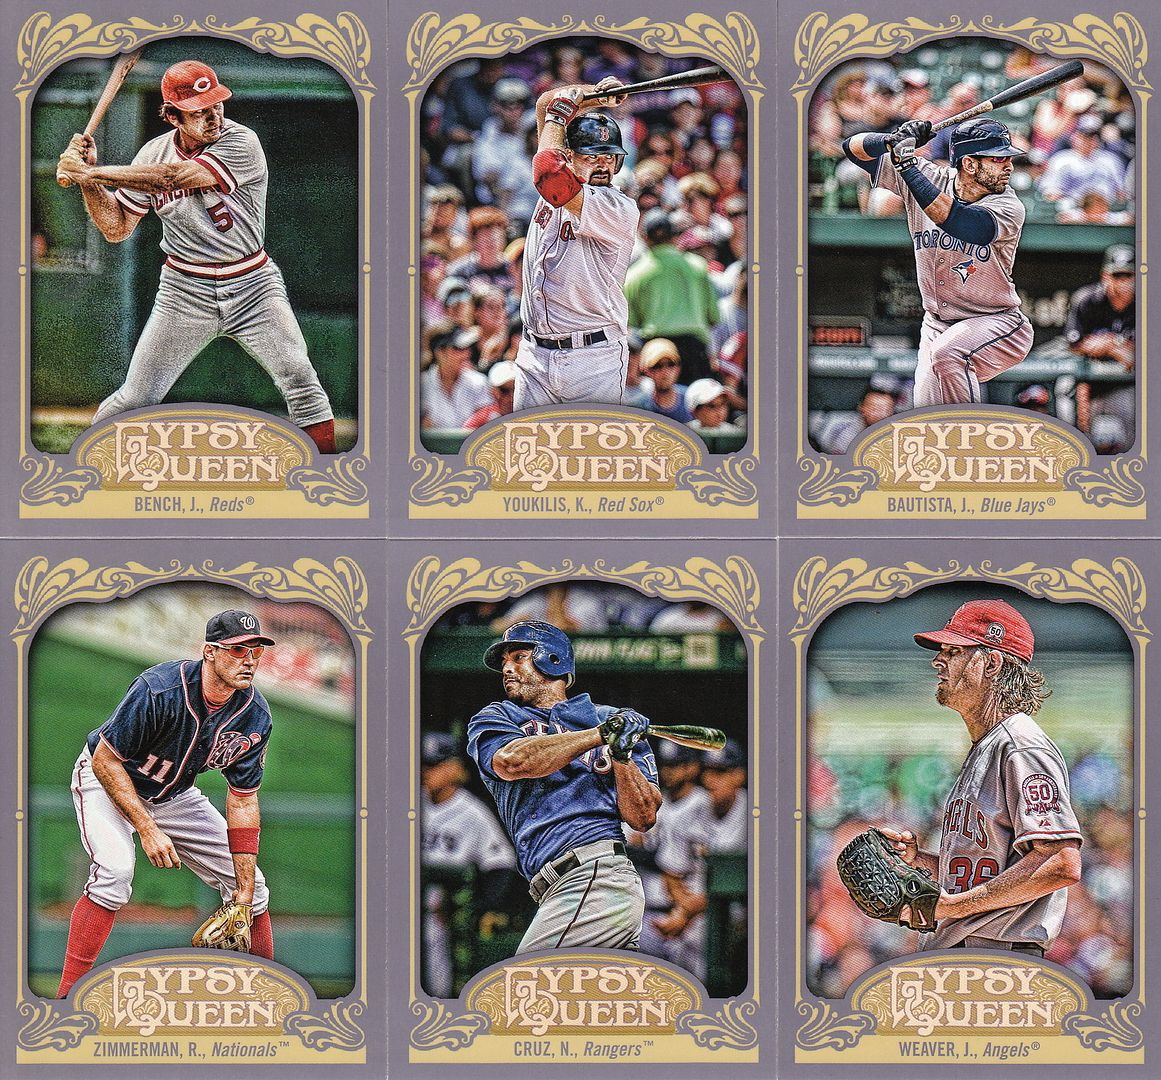 2012 Topps Gypsy Queen Johnny Bench Sp Variation